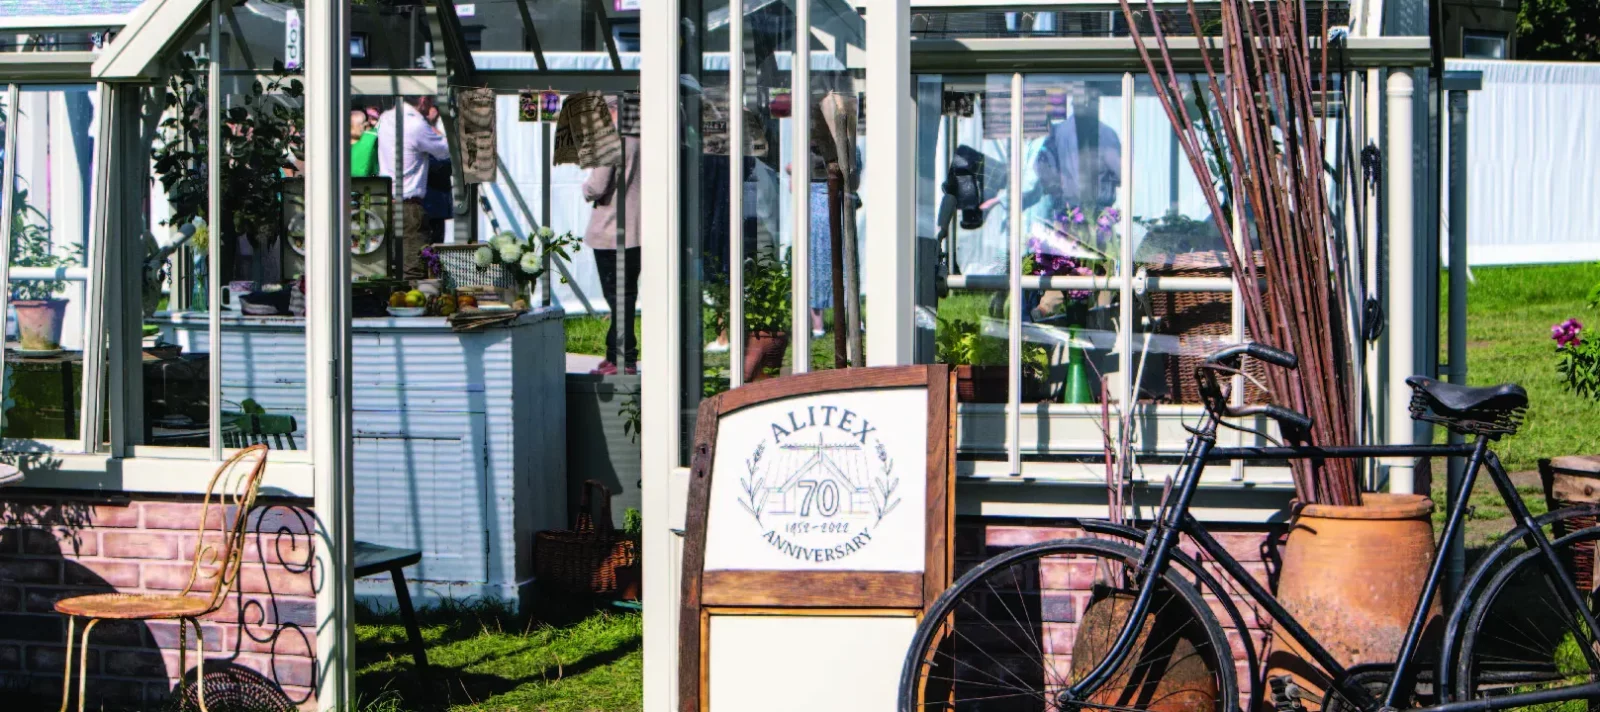 Alitex National Trust Mottisfont Greenhouse at Goodwood Revival, styled with an old vintage bike and car door at the front, with a large ceramic pot filled with sticks.